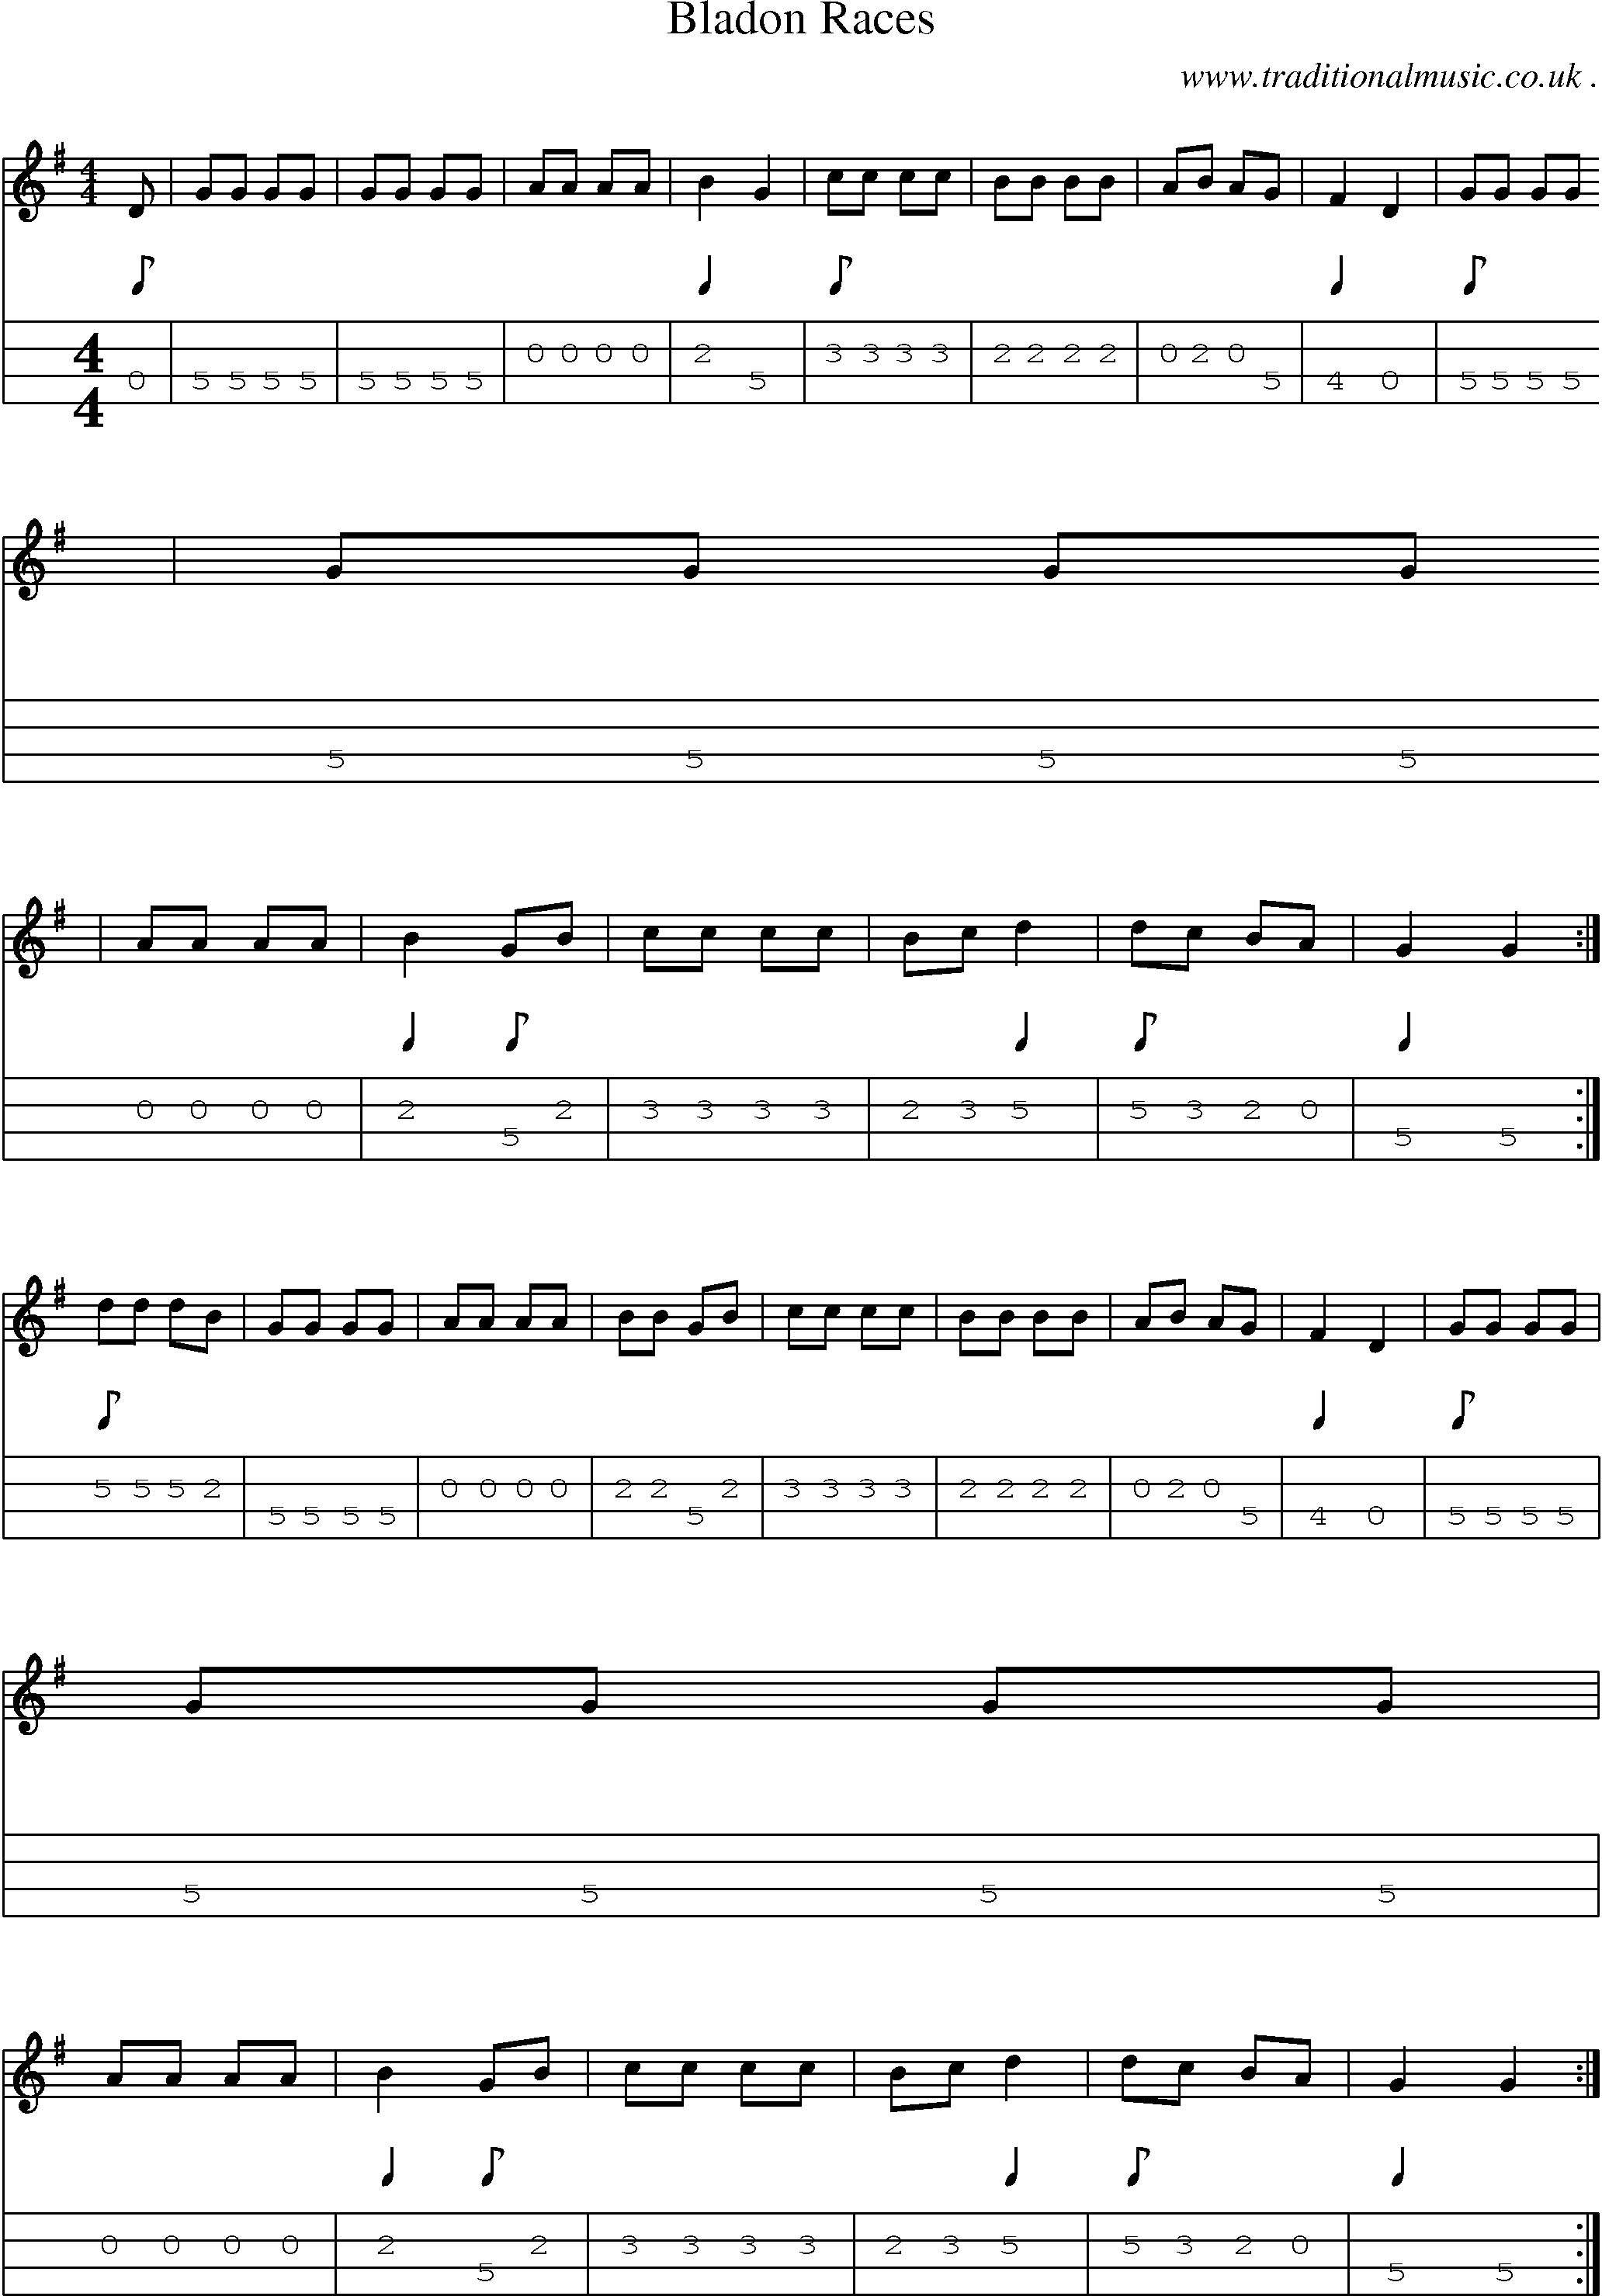 Sheet-Music and Mandolin Tabs for Bladon Races